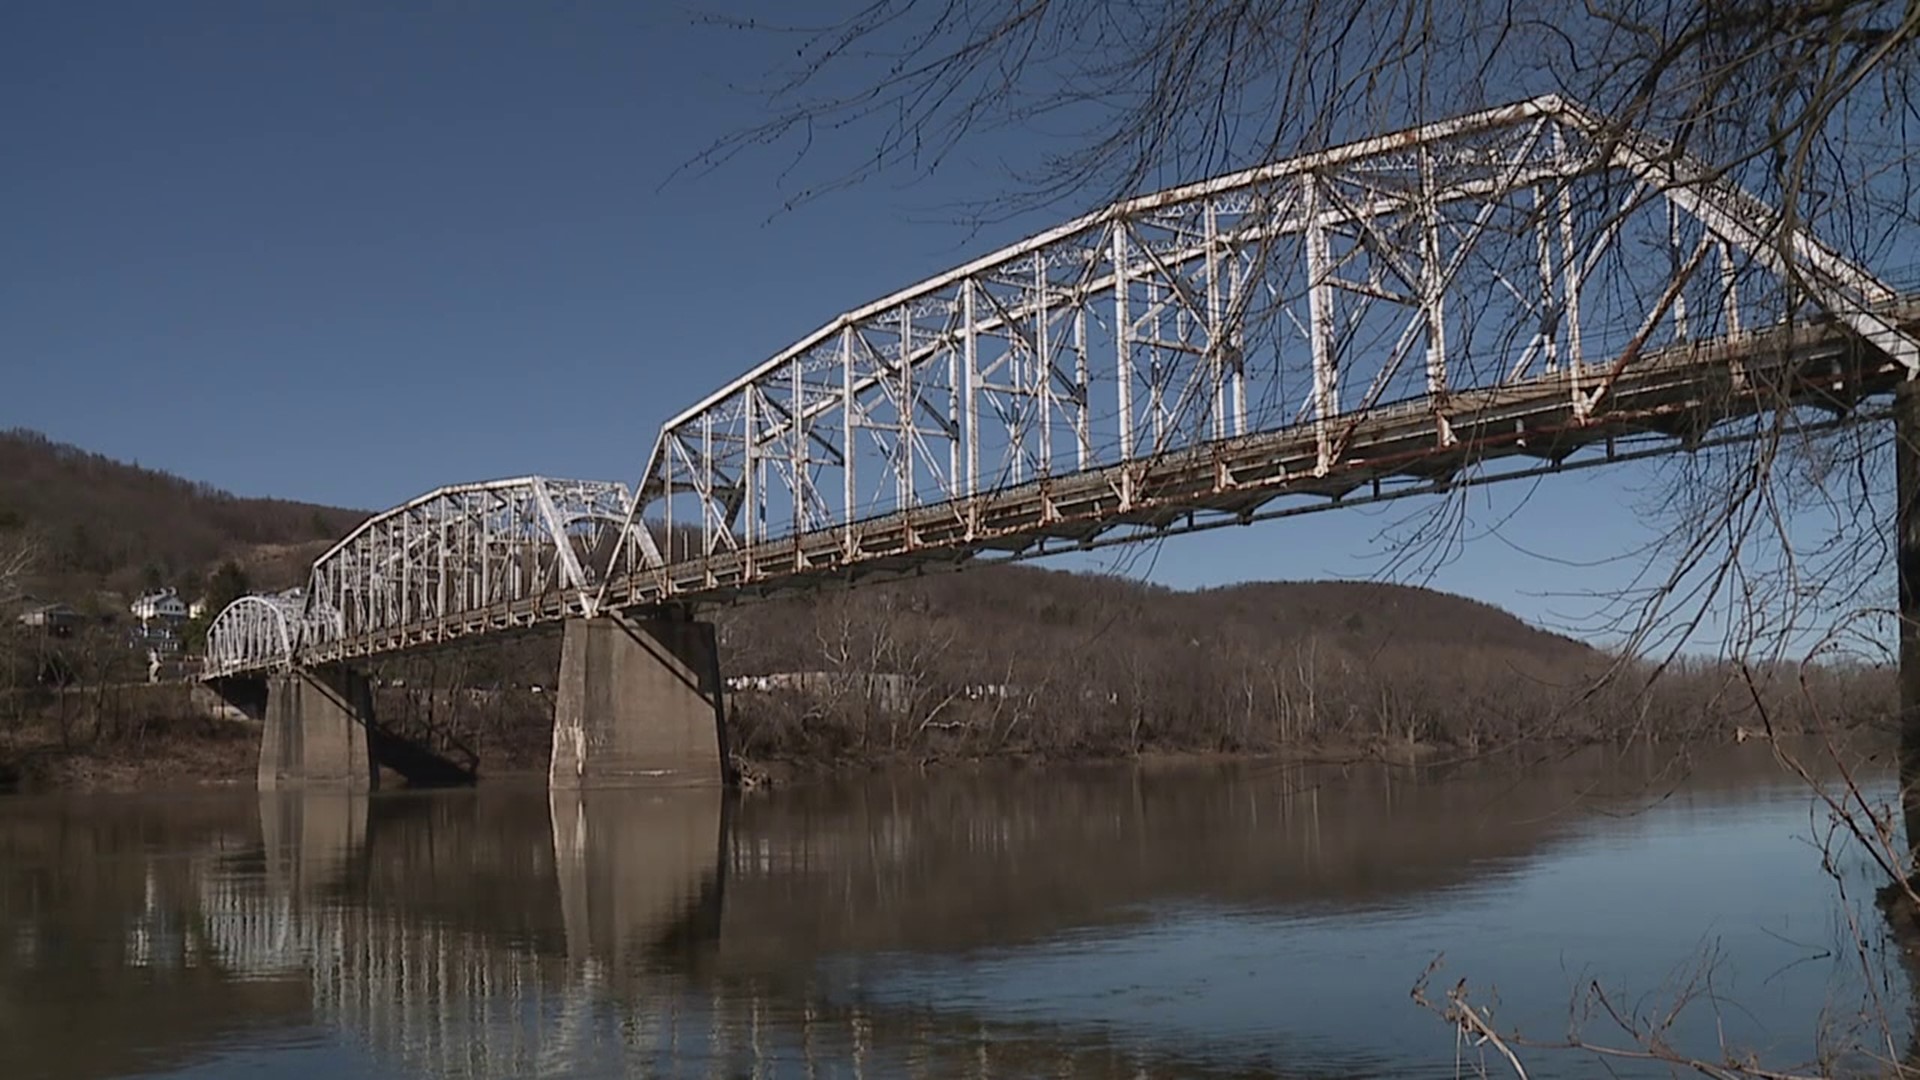 Luzerne County Council will review plans for a bridge that connects Nanticoke and West Nanticoke on Tuesday.